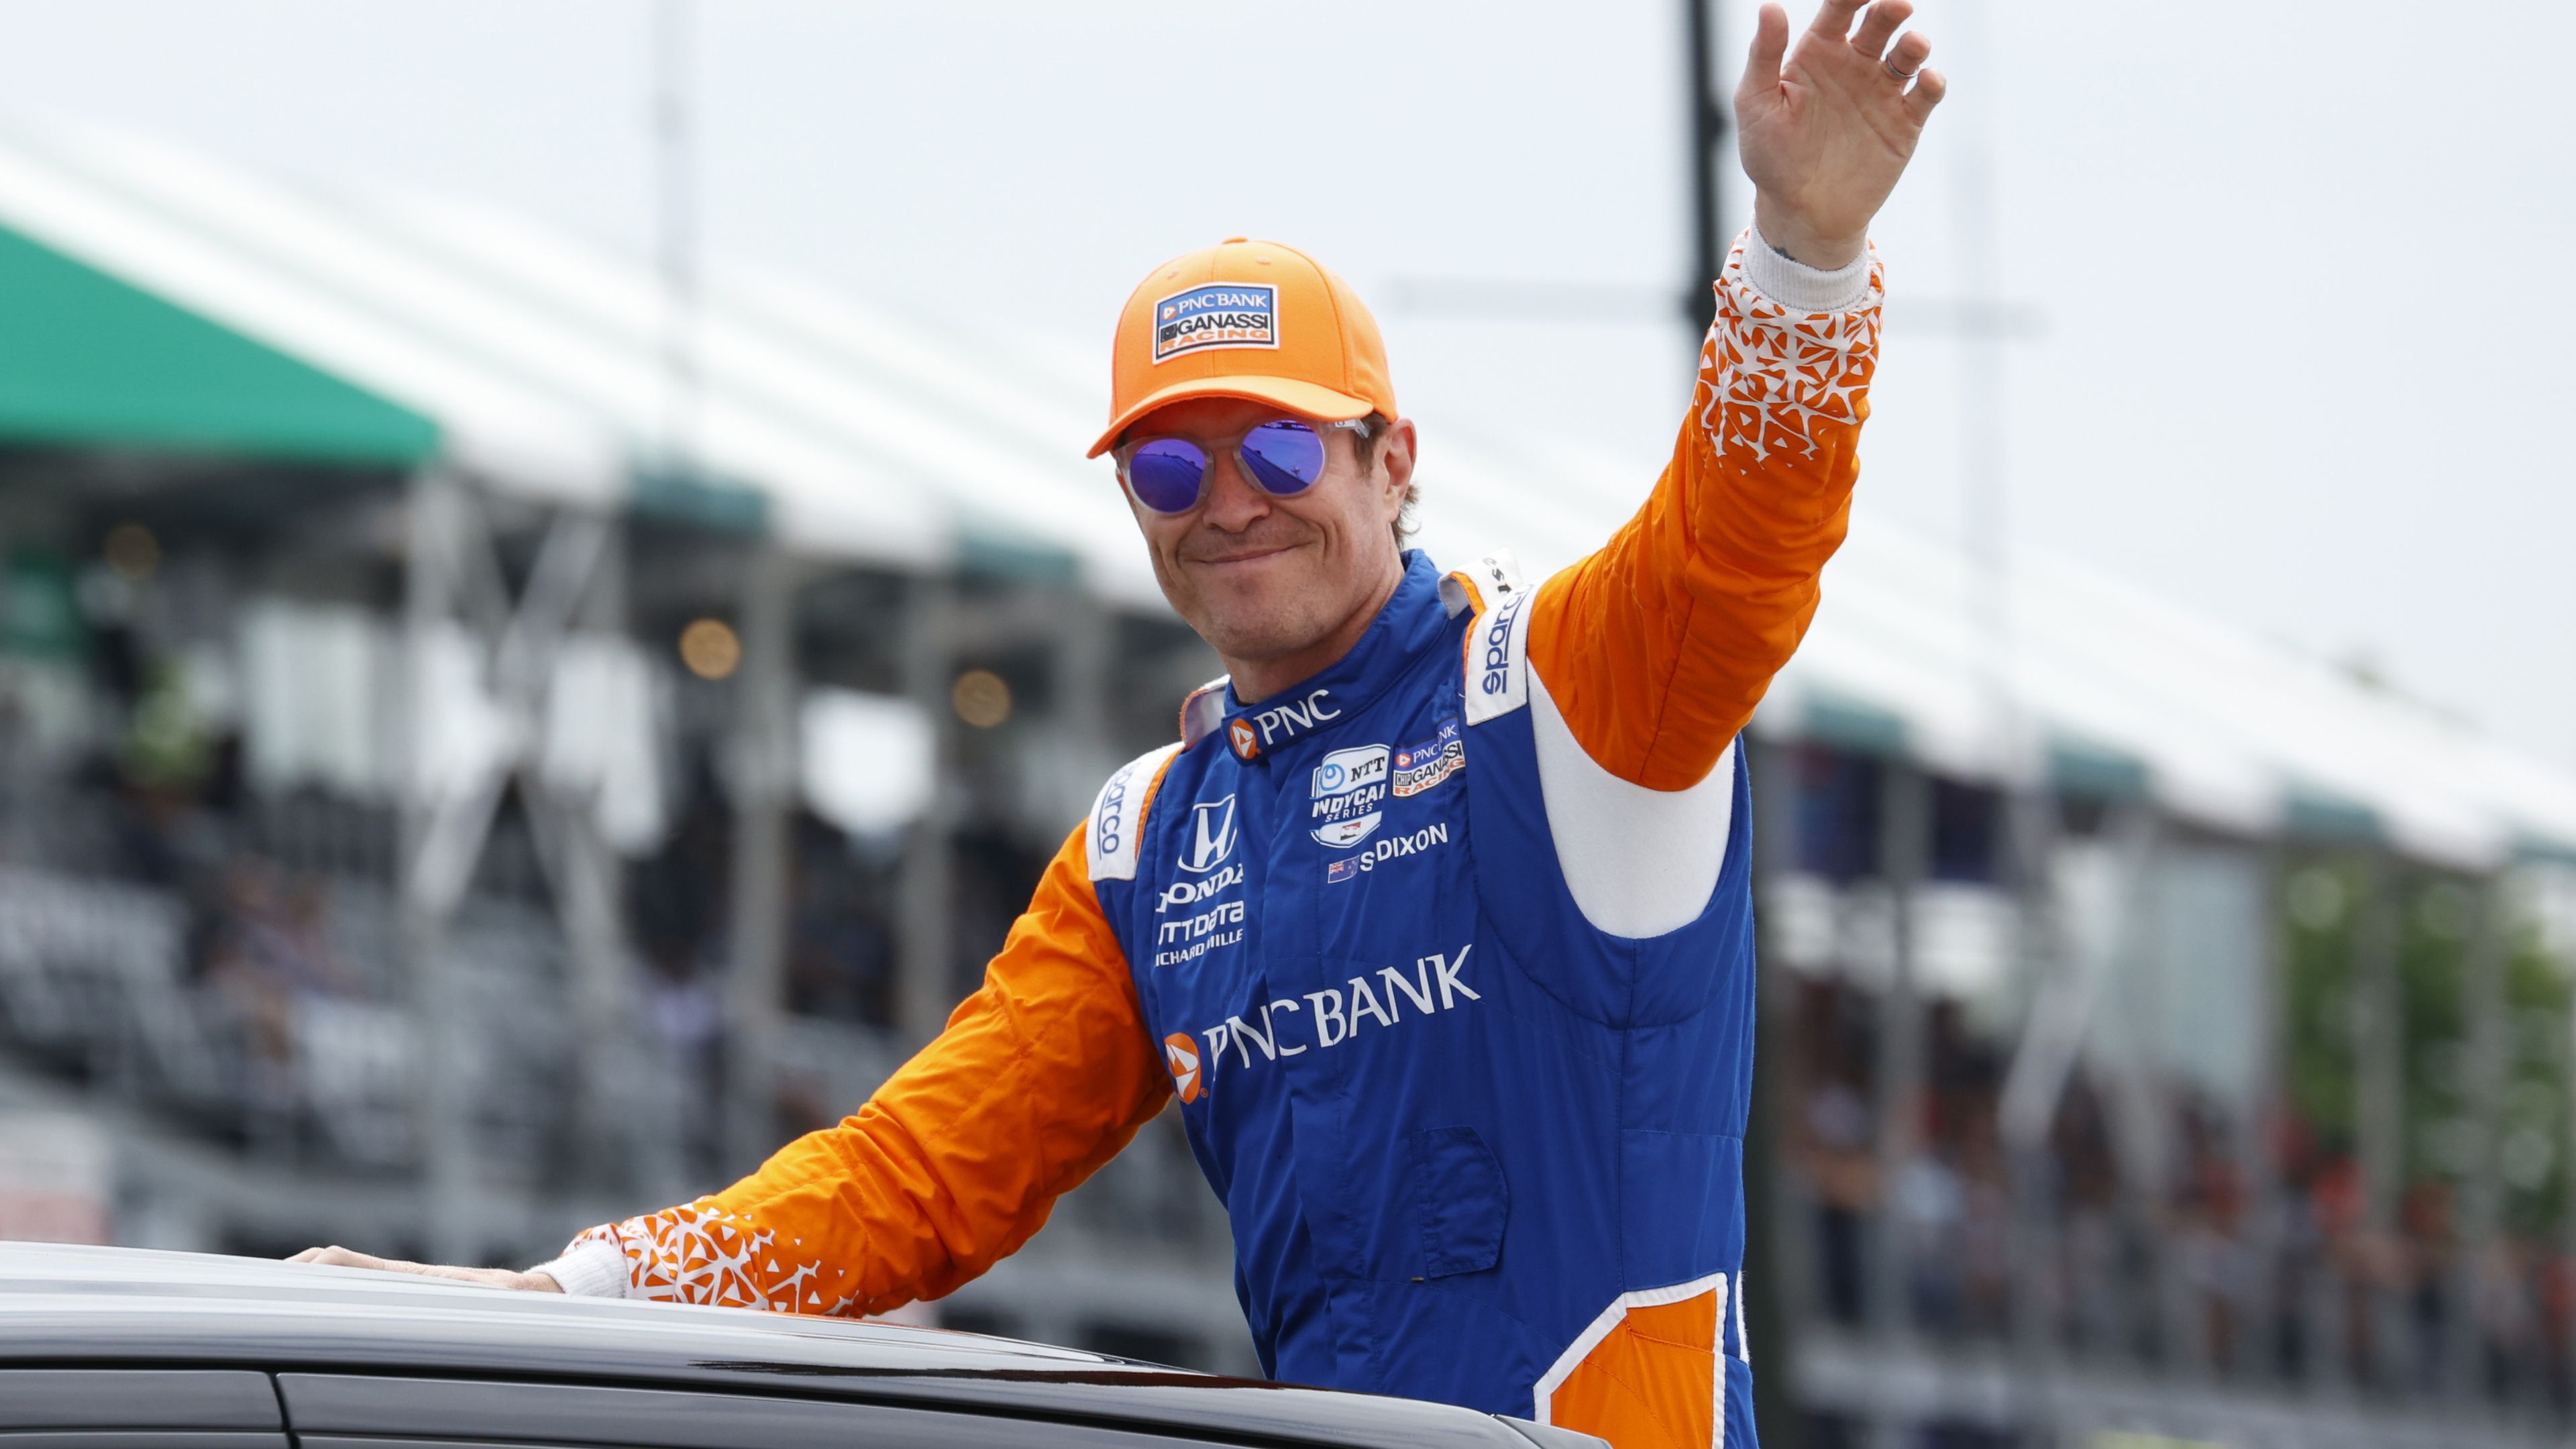 The record 20 years in the making that cemented IndyCar champ Scott Dixon's icon status